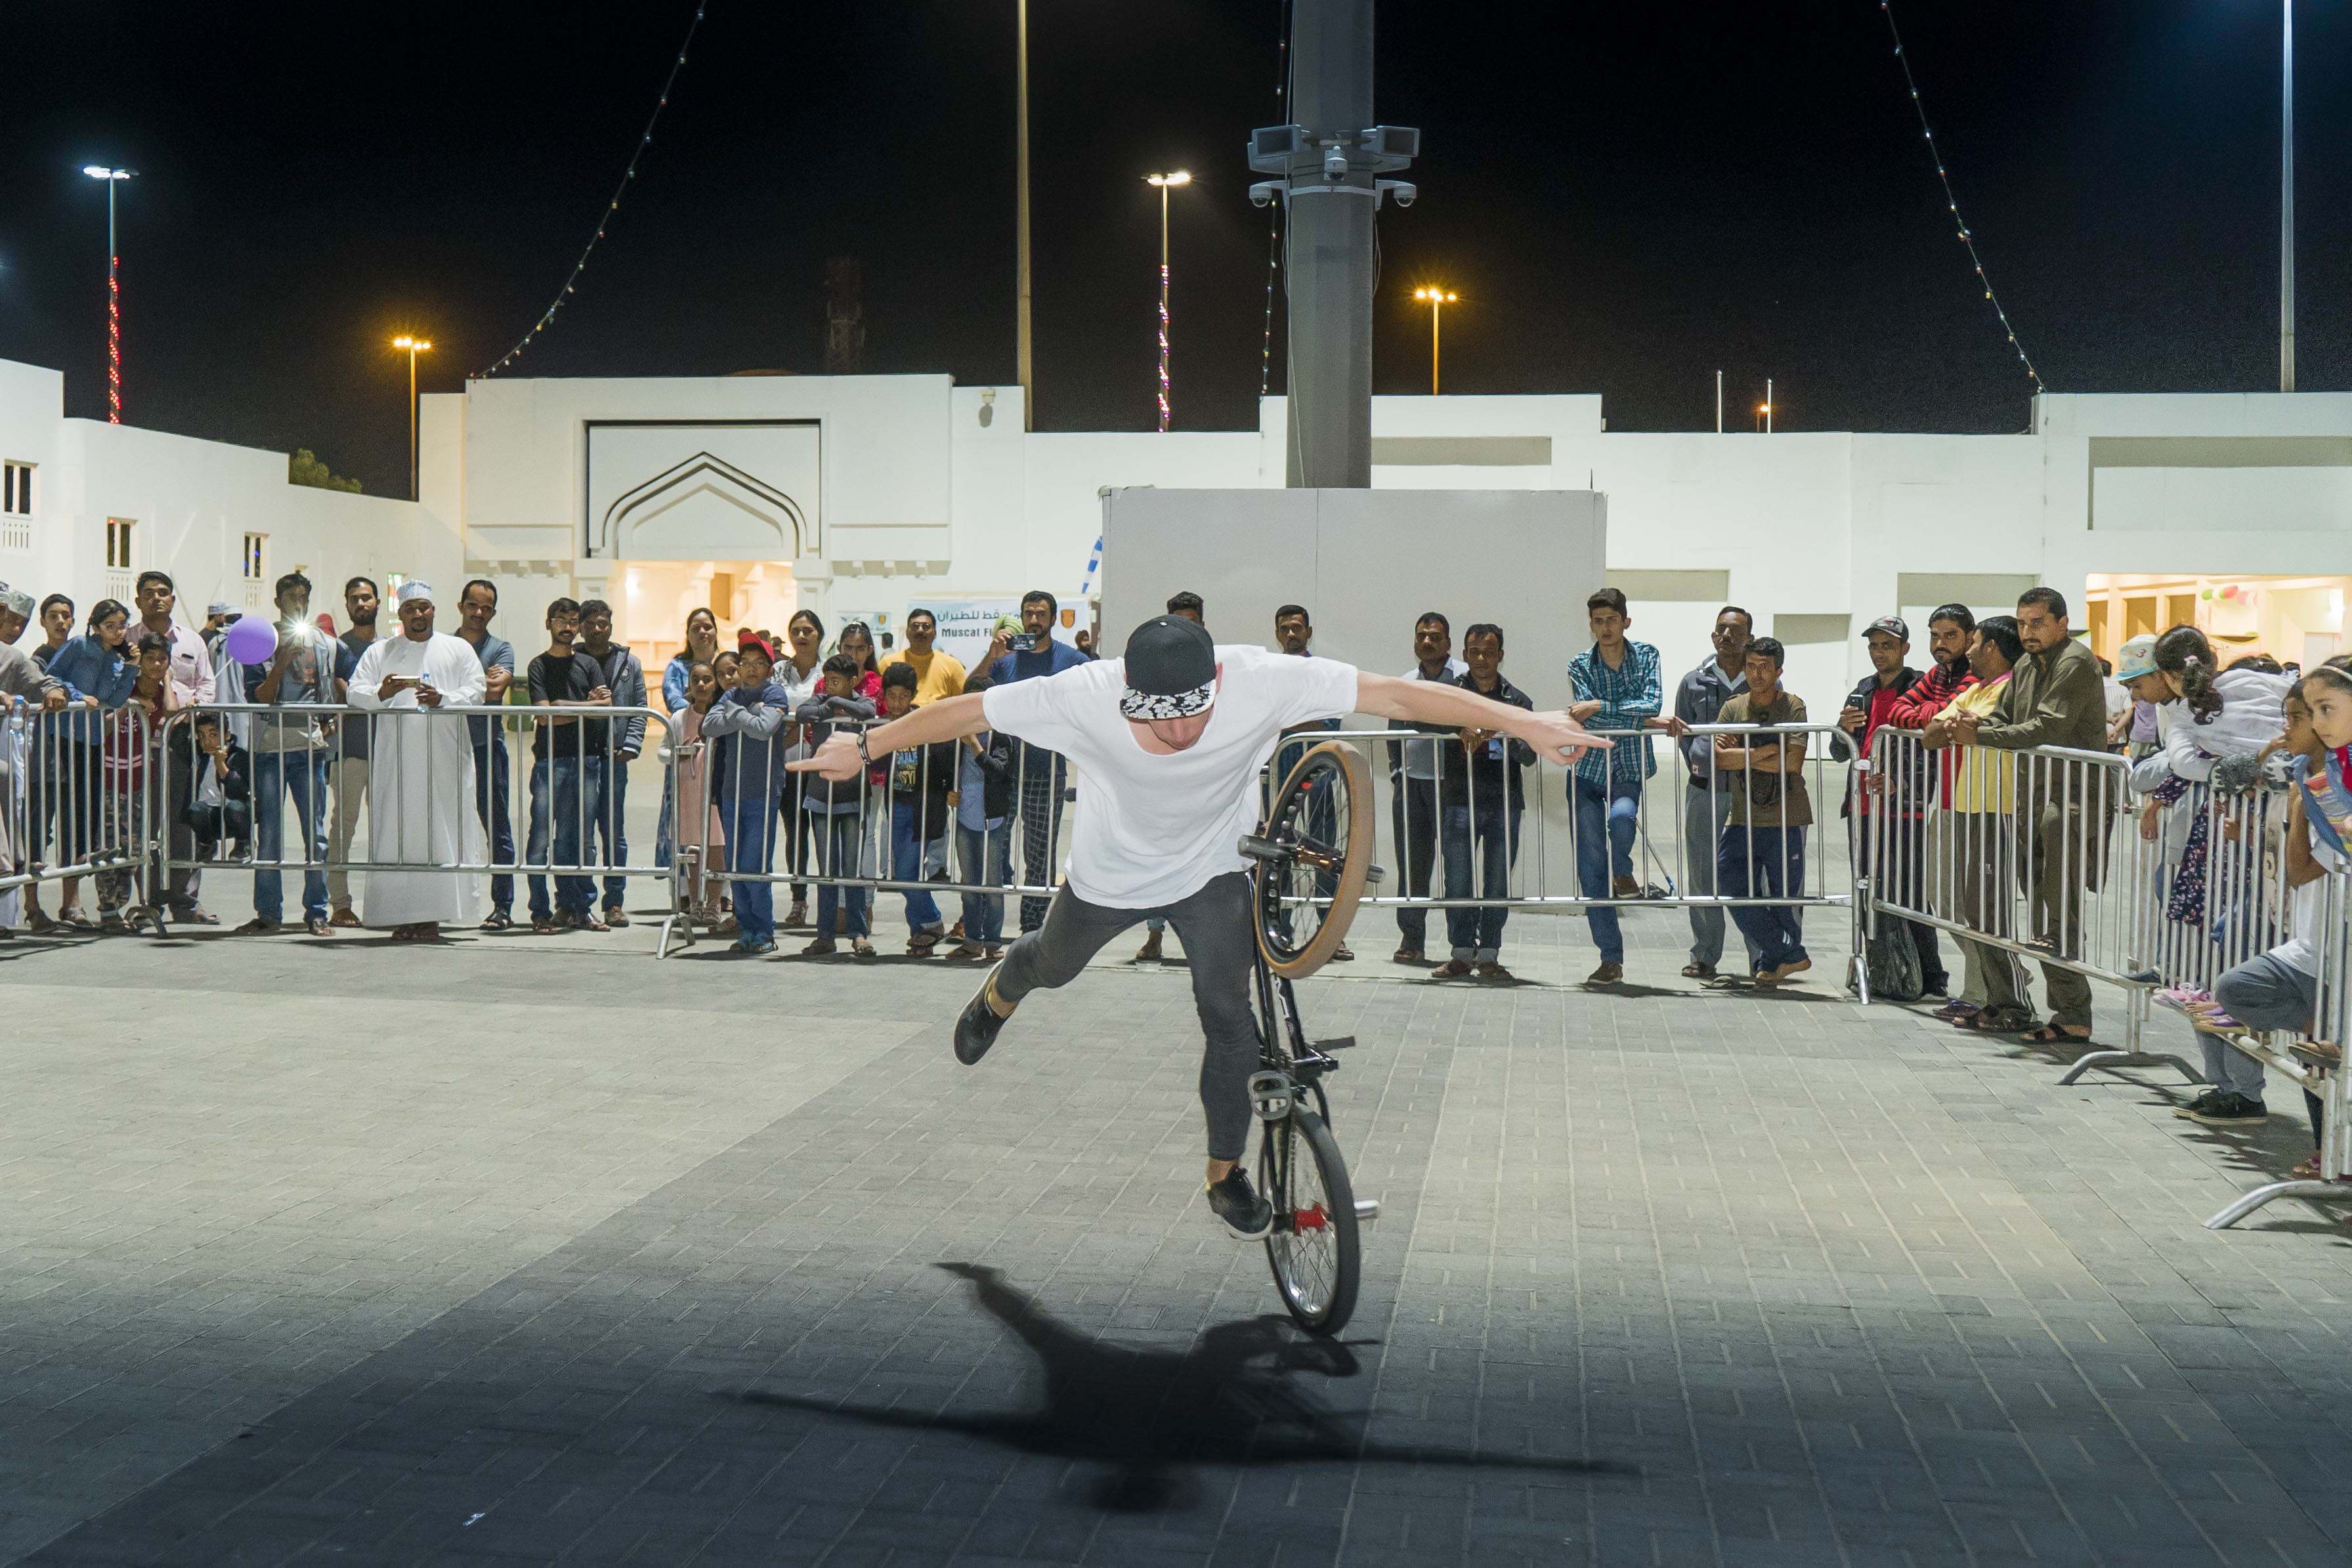 In pictures: Cycling troupe dazzles crowd at Muscat Festival